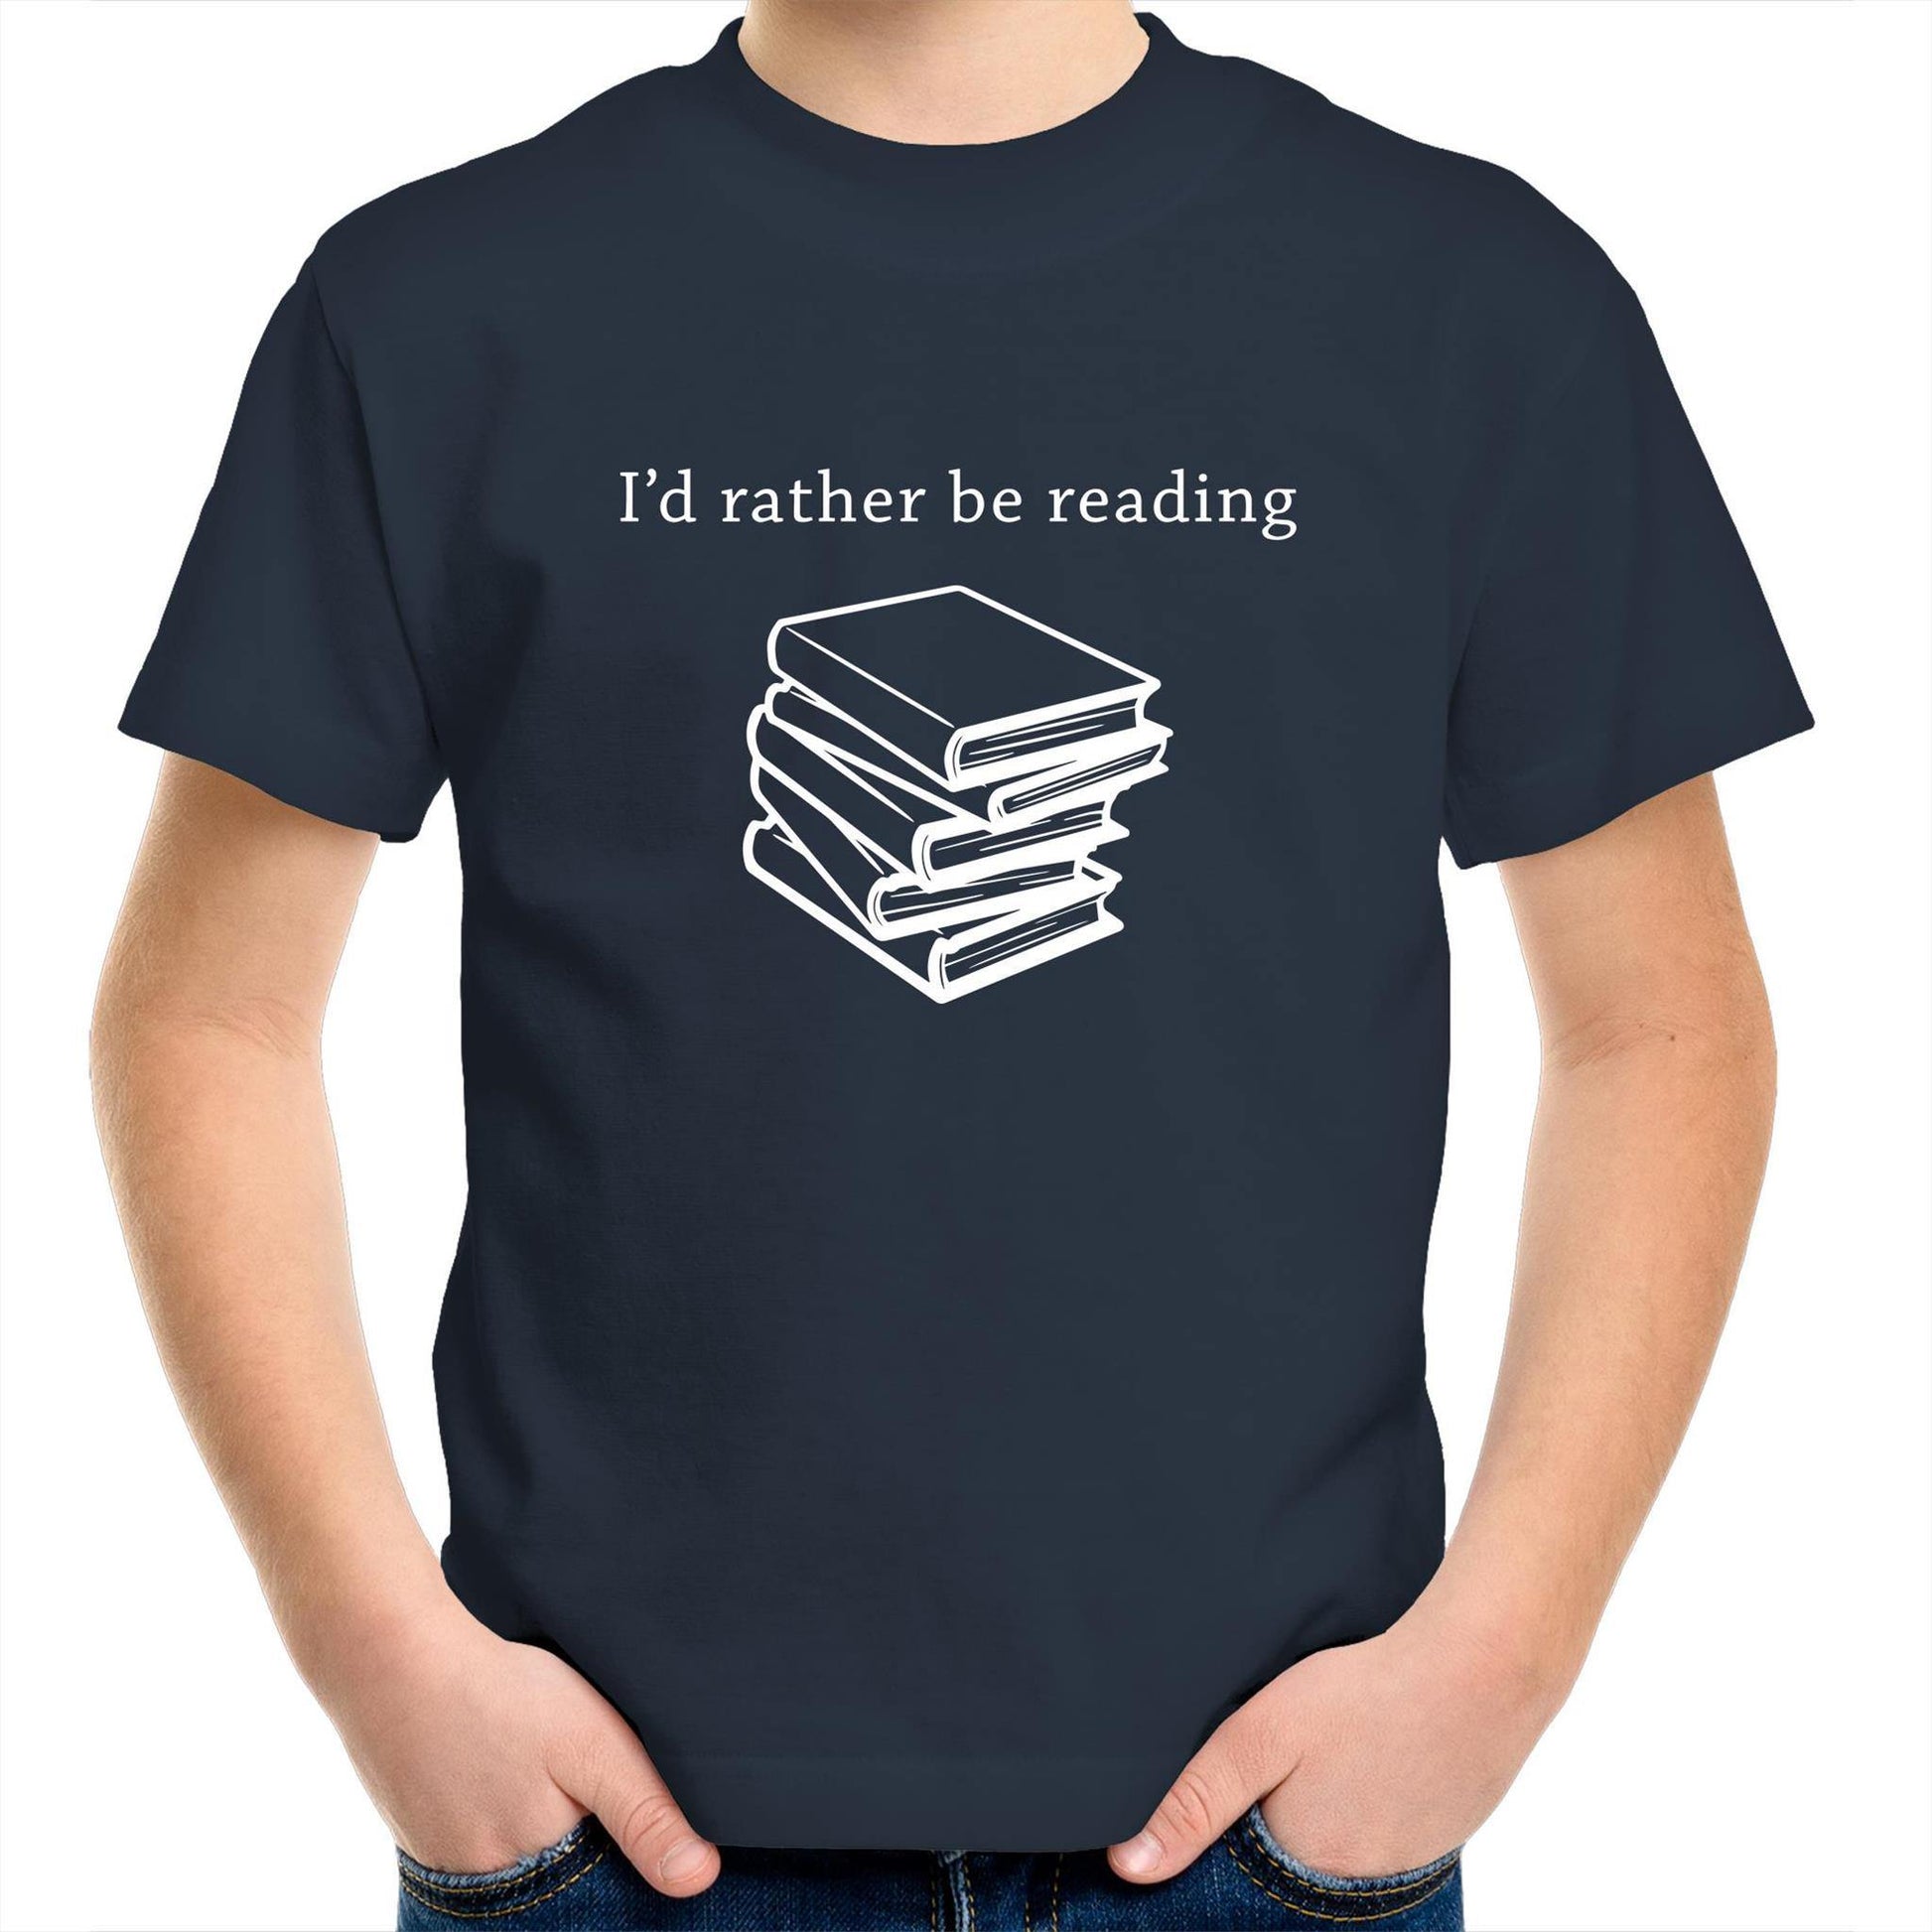 I'd Rather Be Reading - Kids Youth Crew T-Shirt Navy Kids Youth T-shirt Funny